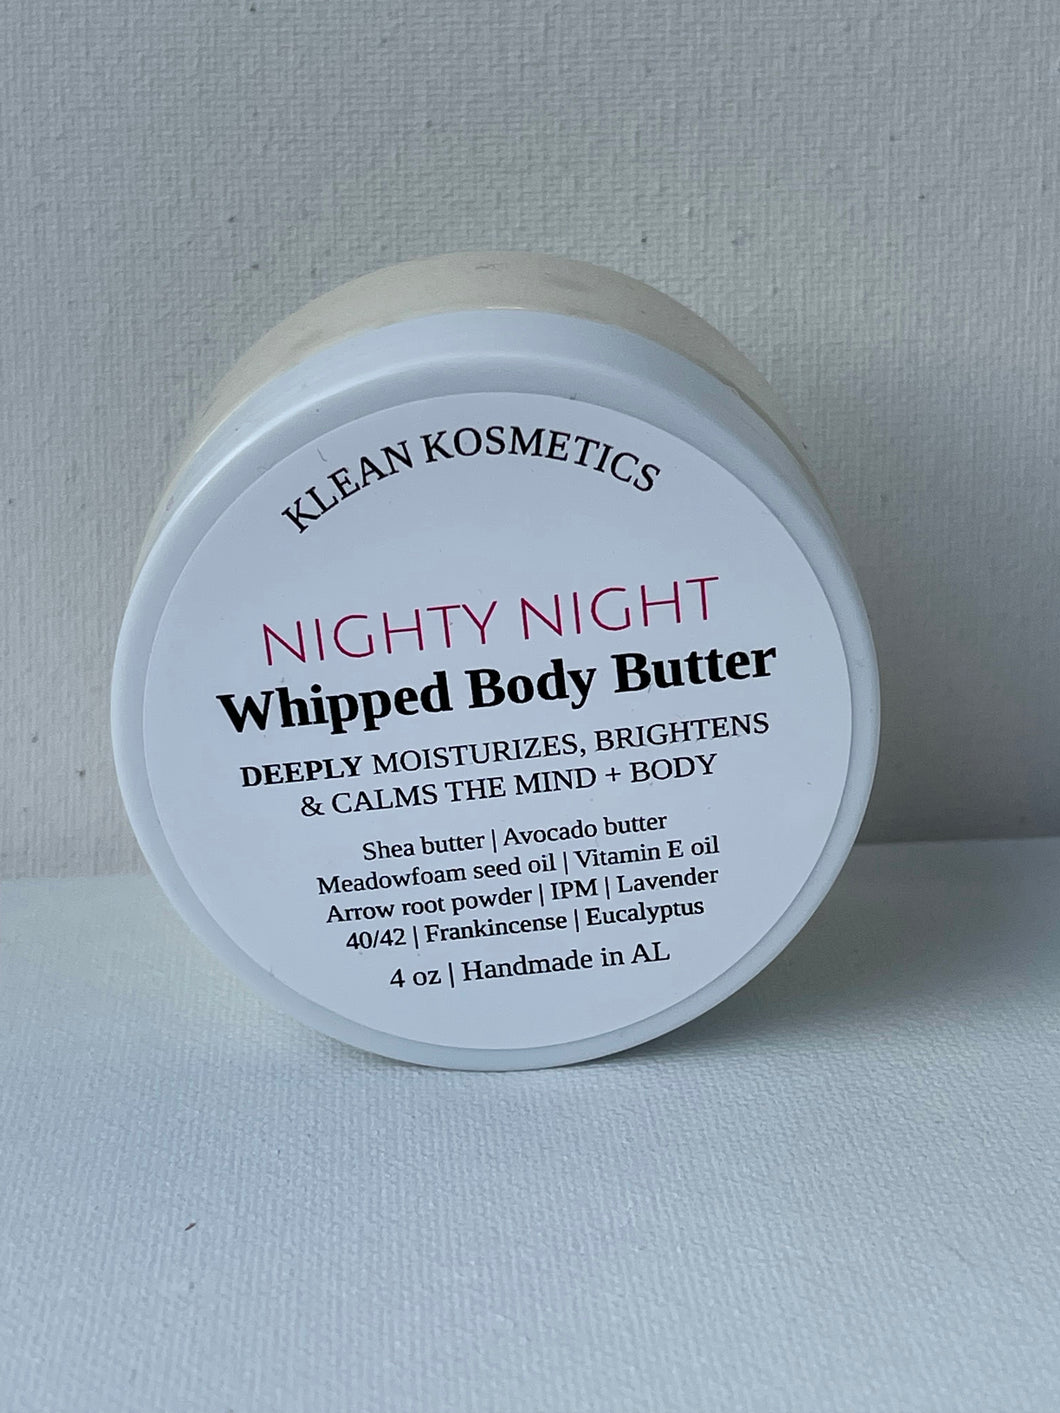 ESSENTIAL OIL FRAGRANCED BODY BUTTERS